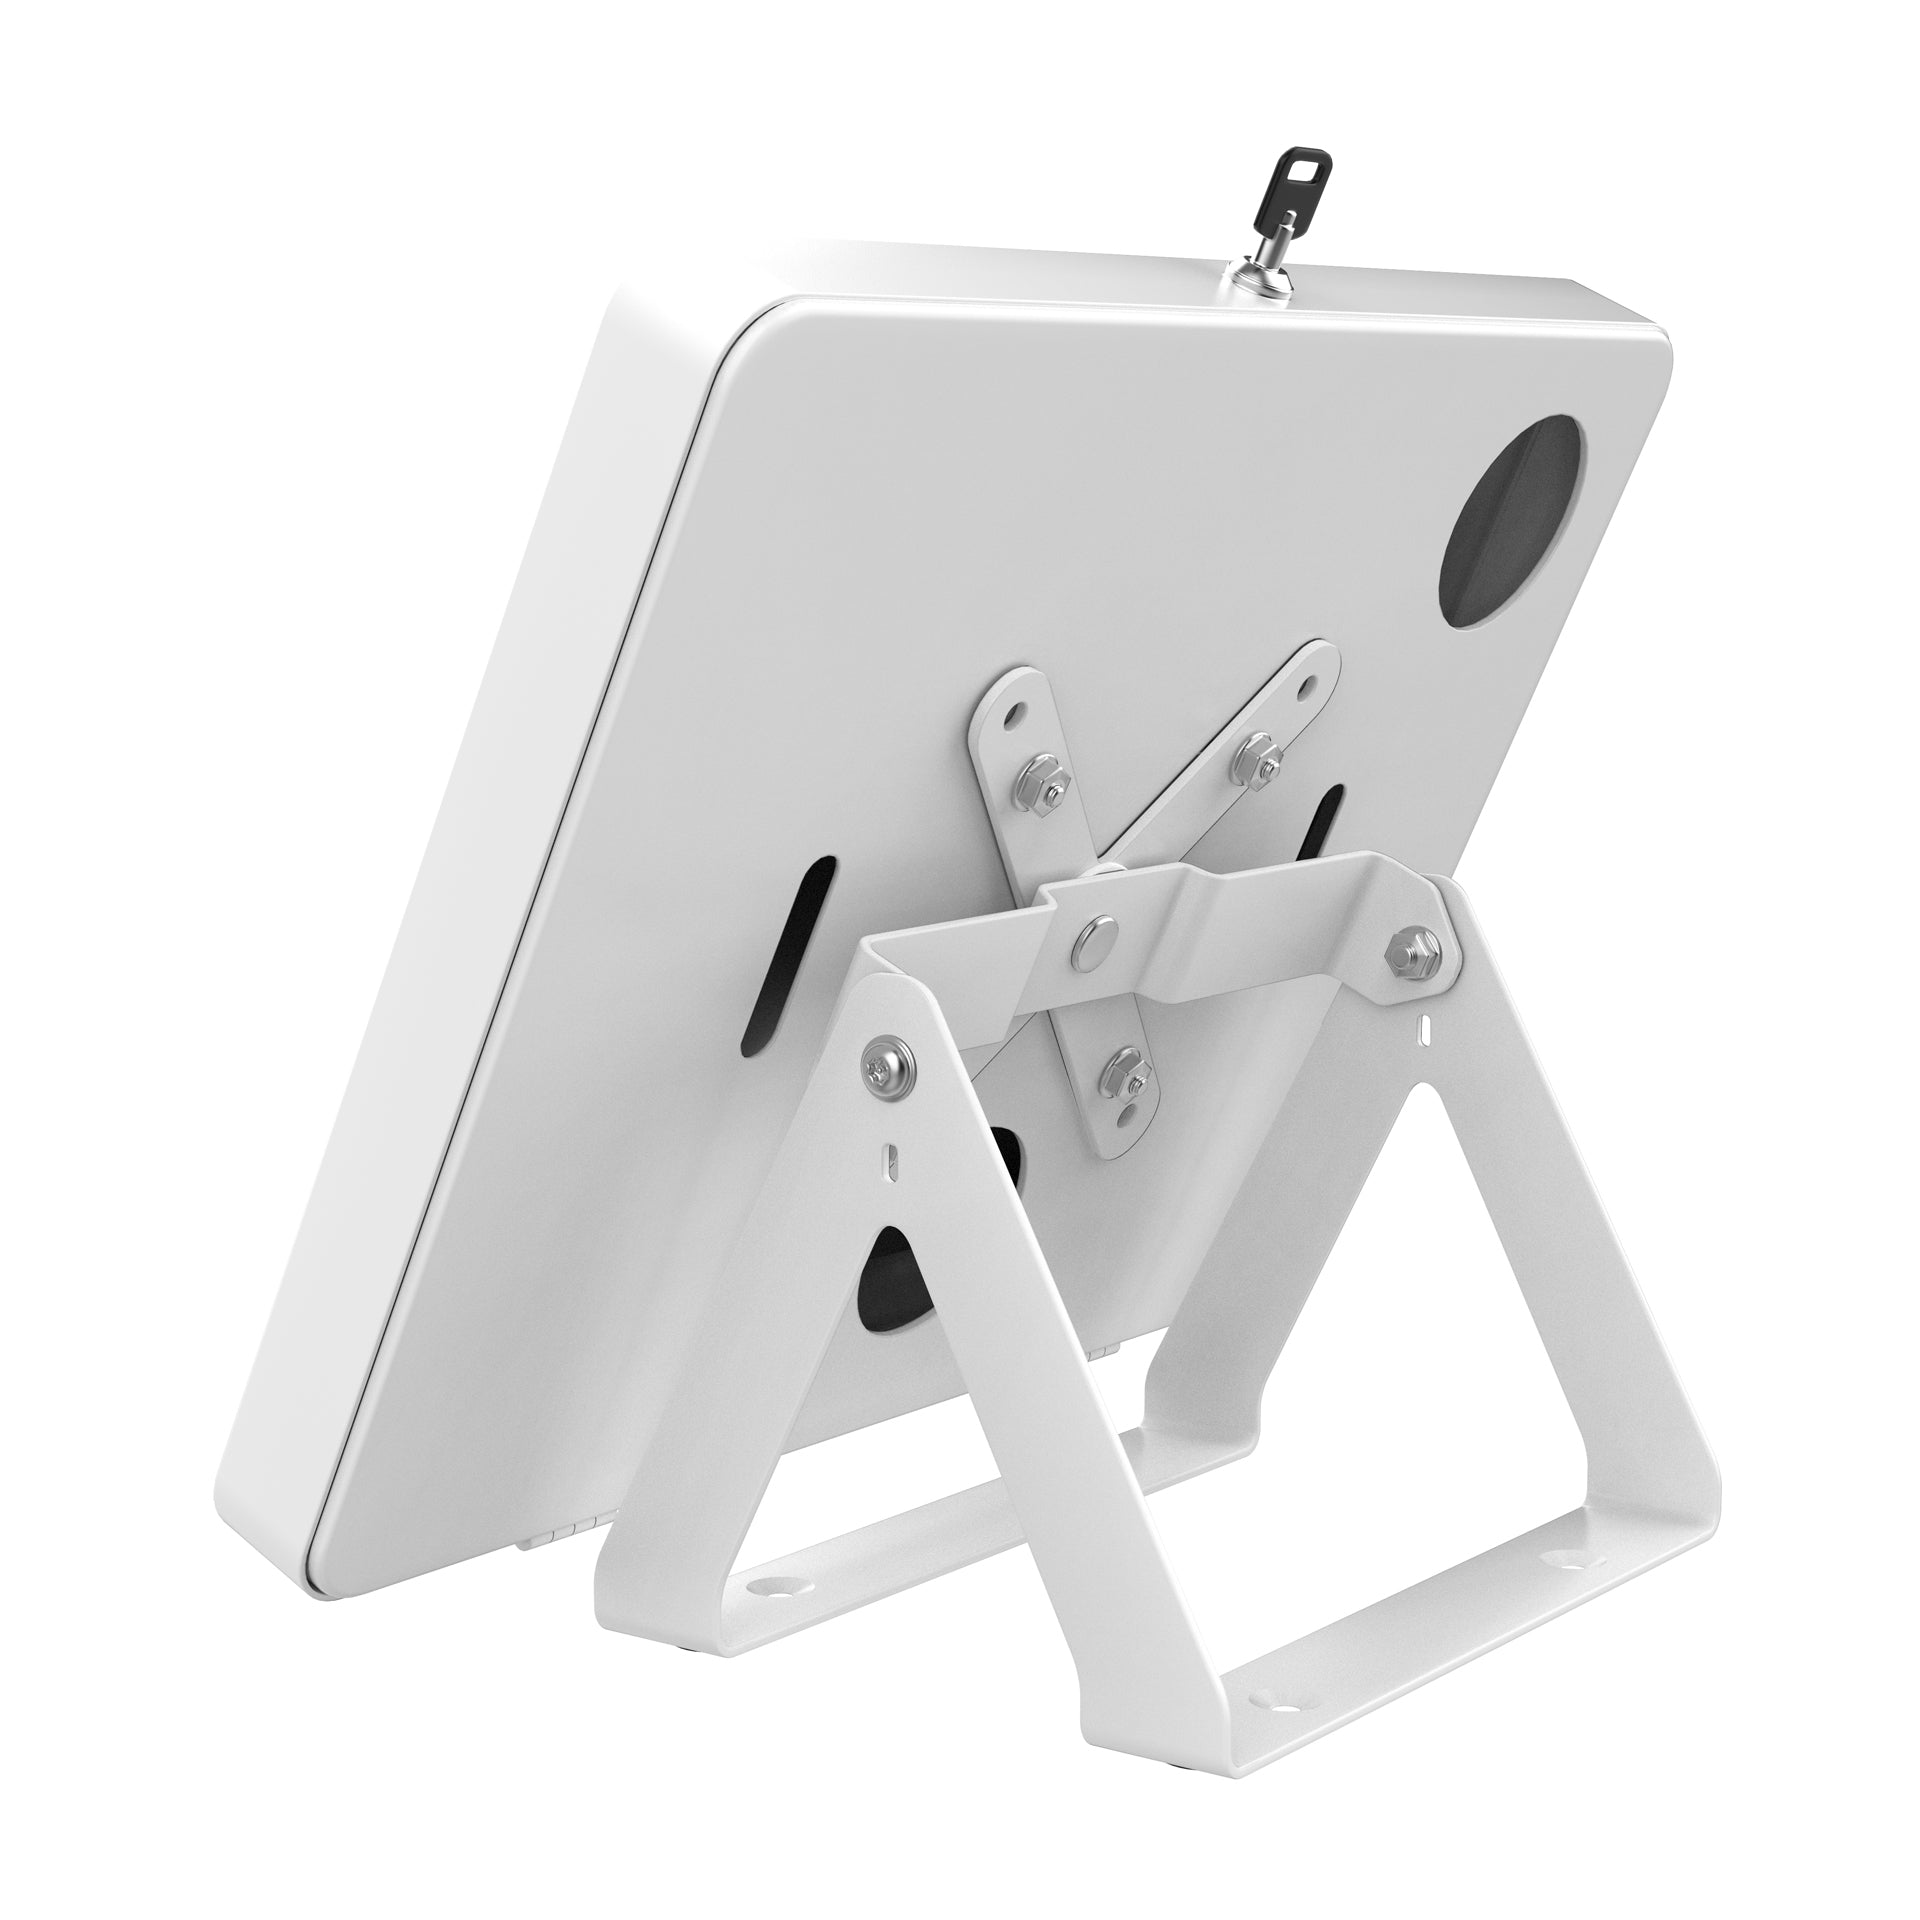 Full Rotation Desk Mount with Universal Security Enclosure (Black)